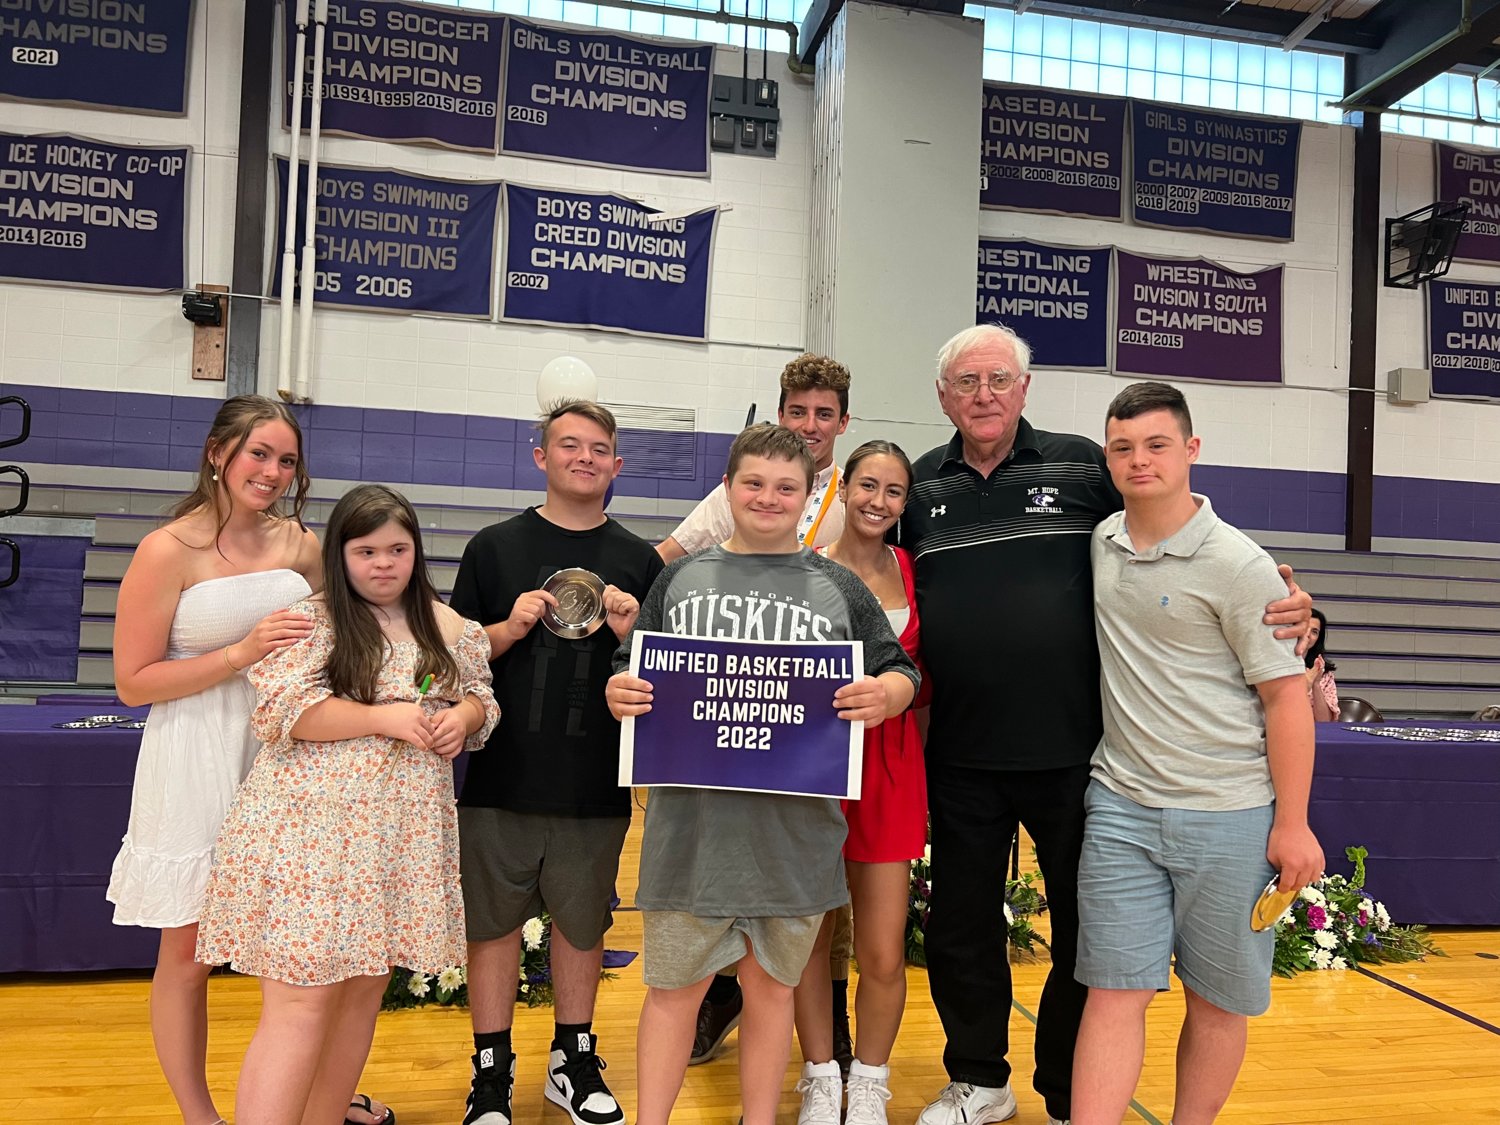 The Mt. Hope Unified Basketball Team was recognized for its divisional championship on Wednesday night. Recognized were coach Tom Fullen, as well as Mike Bissone